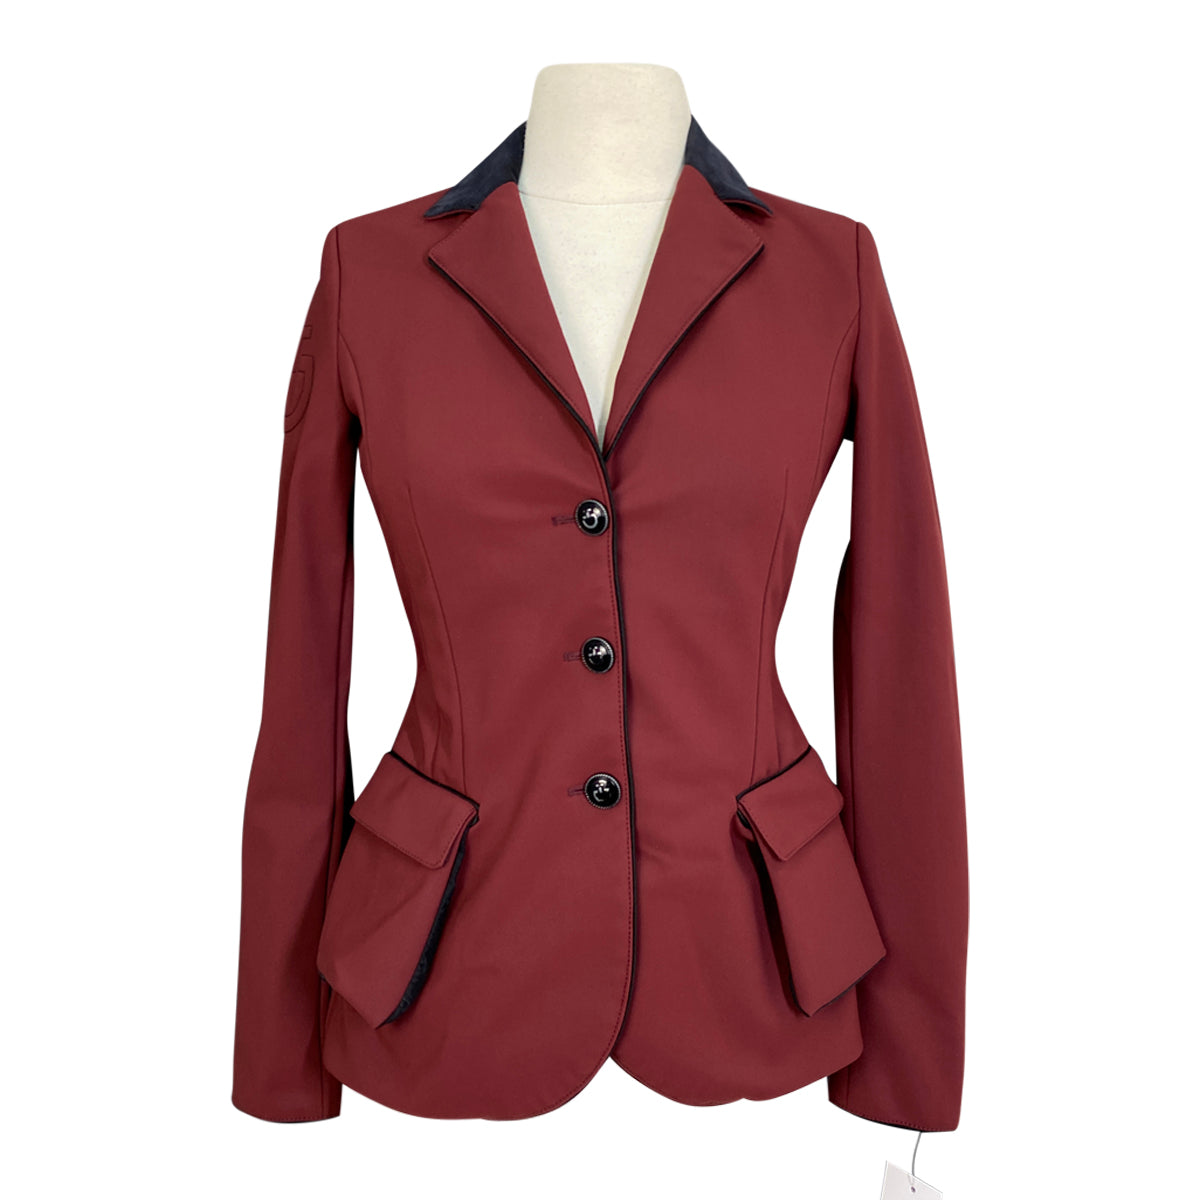 Cavalleria Toscana Competition Jacket in Burgundy/Black - Women&#39;s IT 38 (US 4)